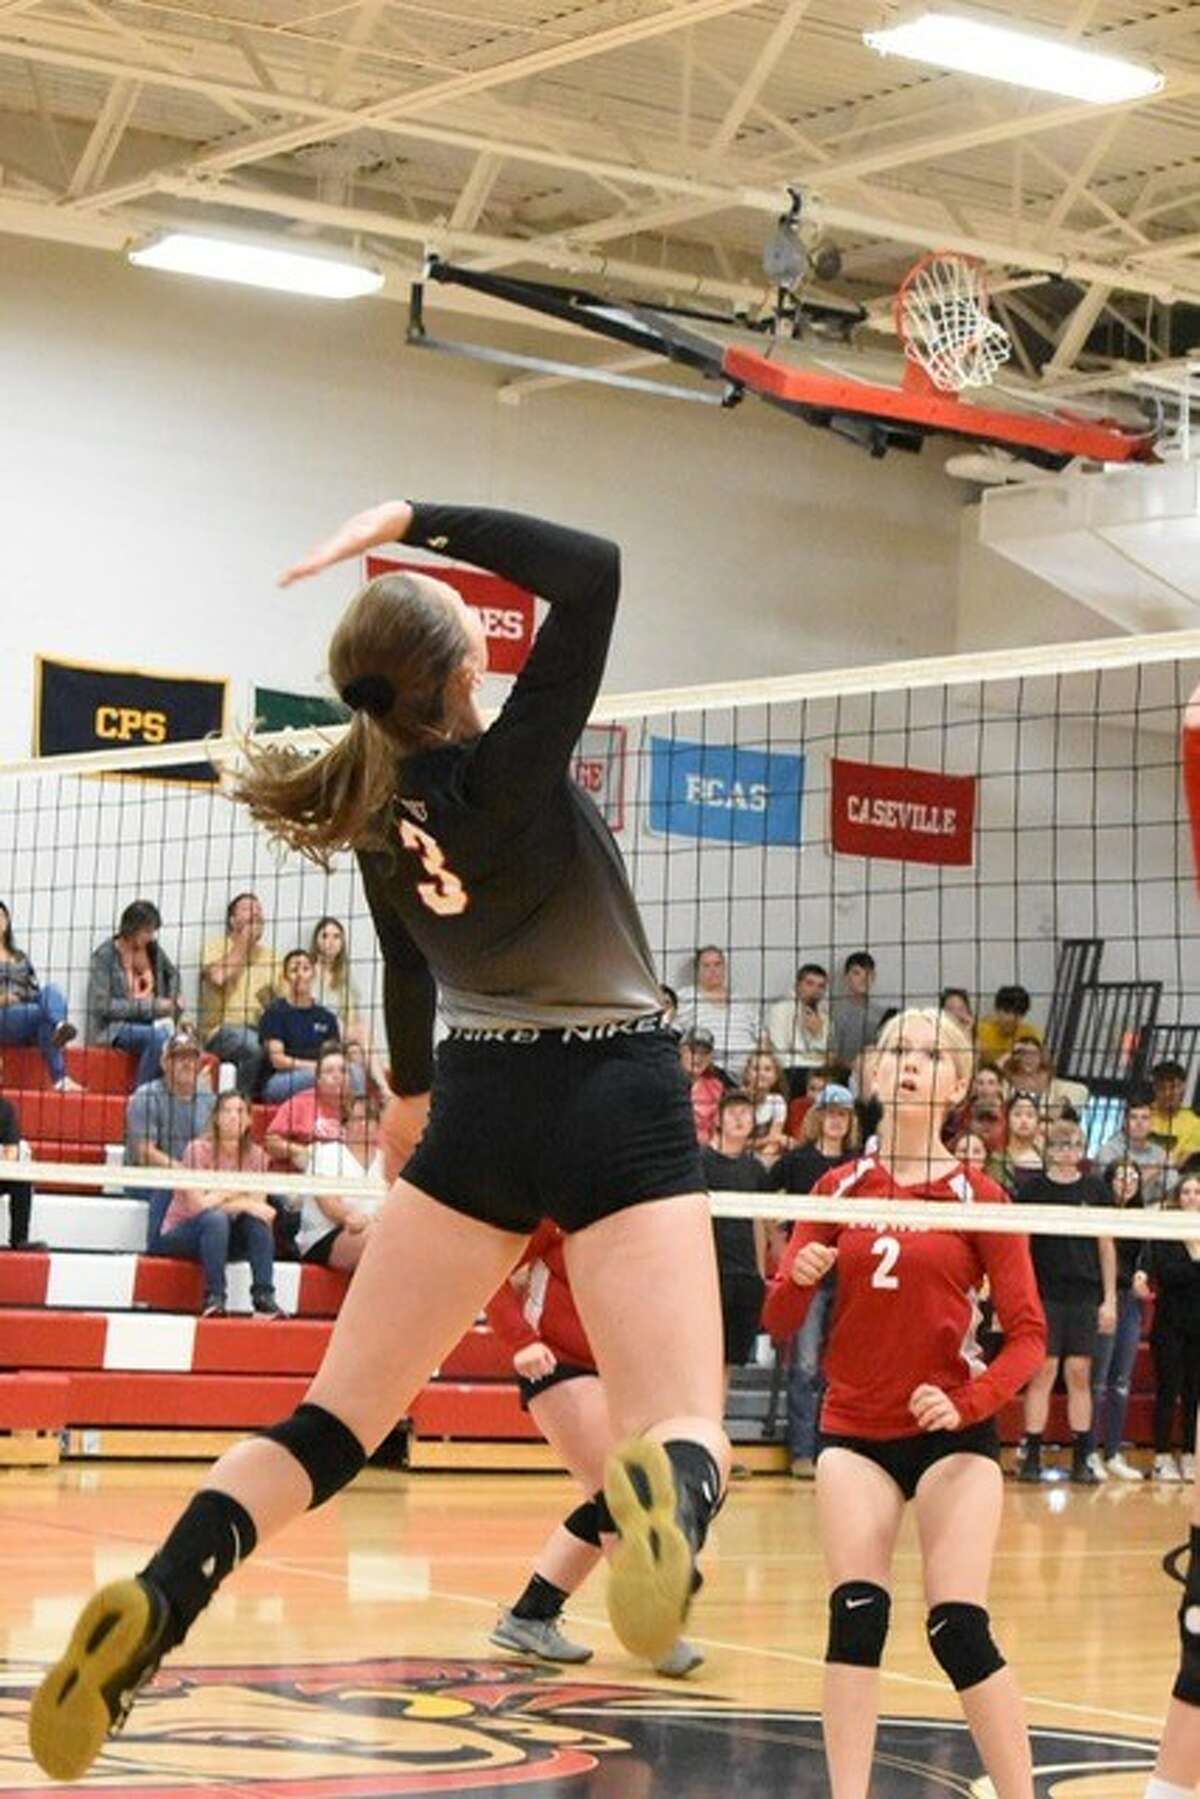 Owendale-Gagetown's Shelby Bowers on a kill.